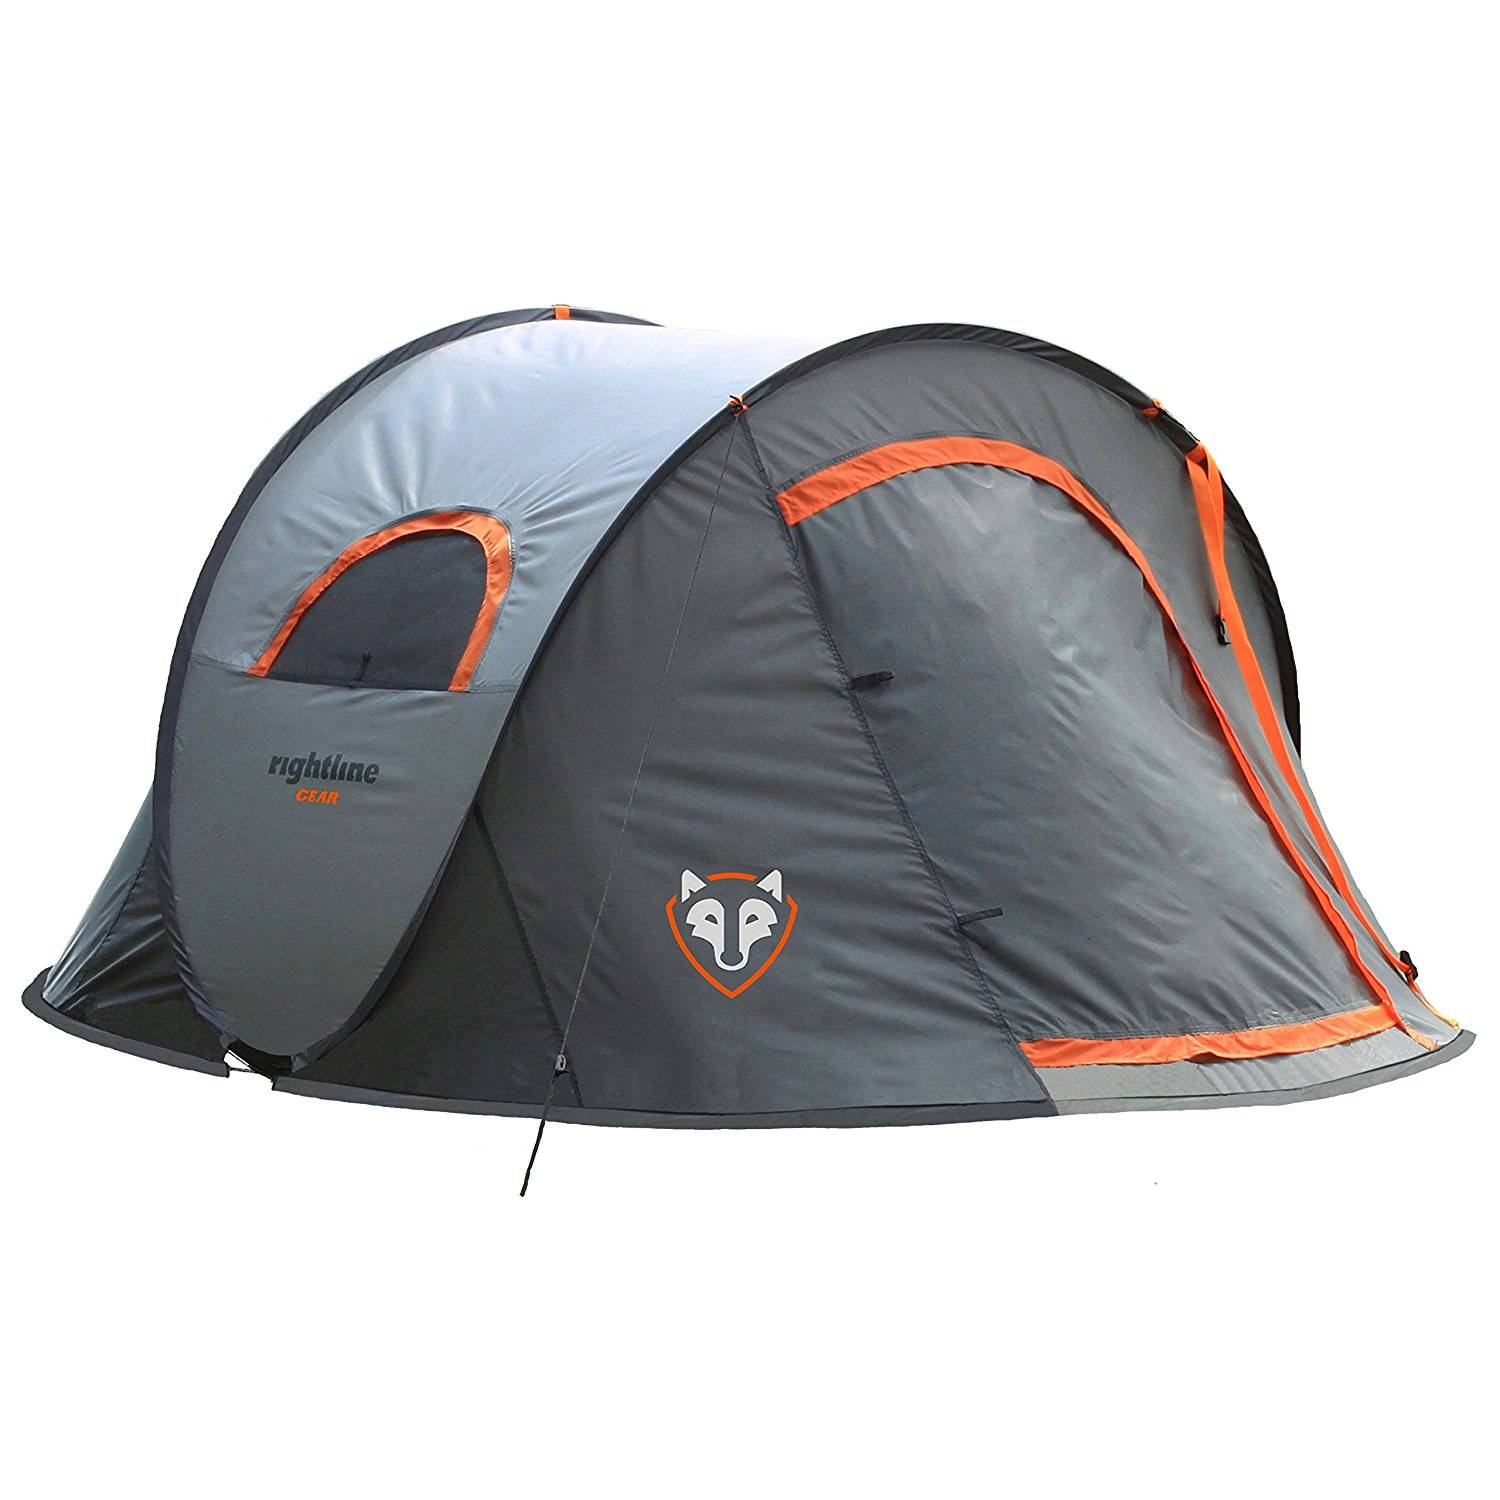 Rightline Gear 2 Person Pop Up Camping Tent